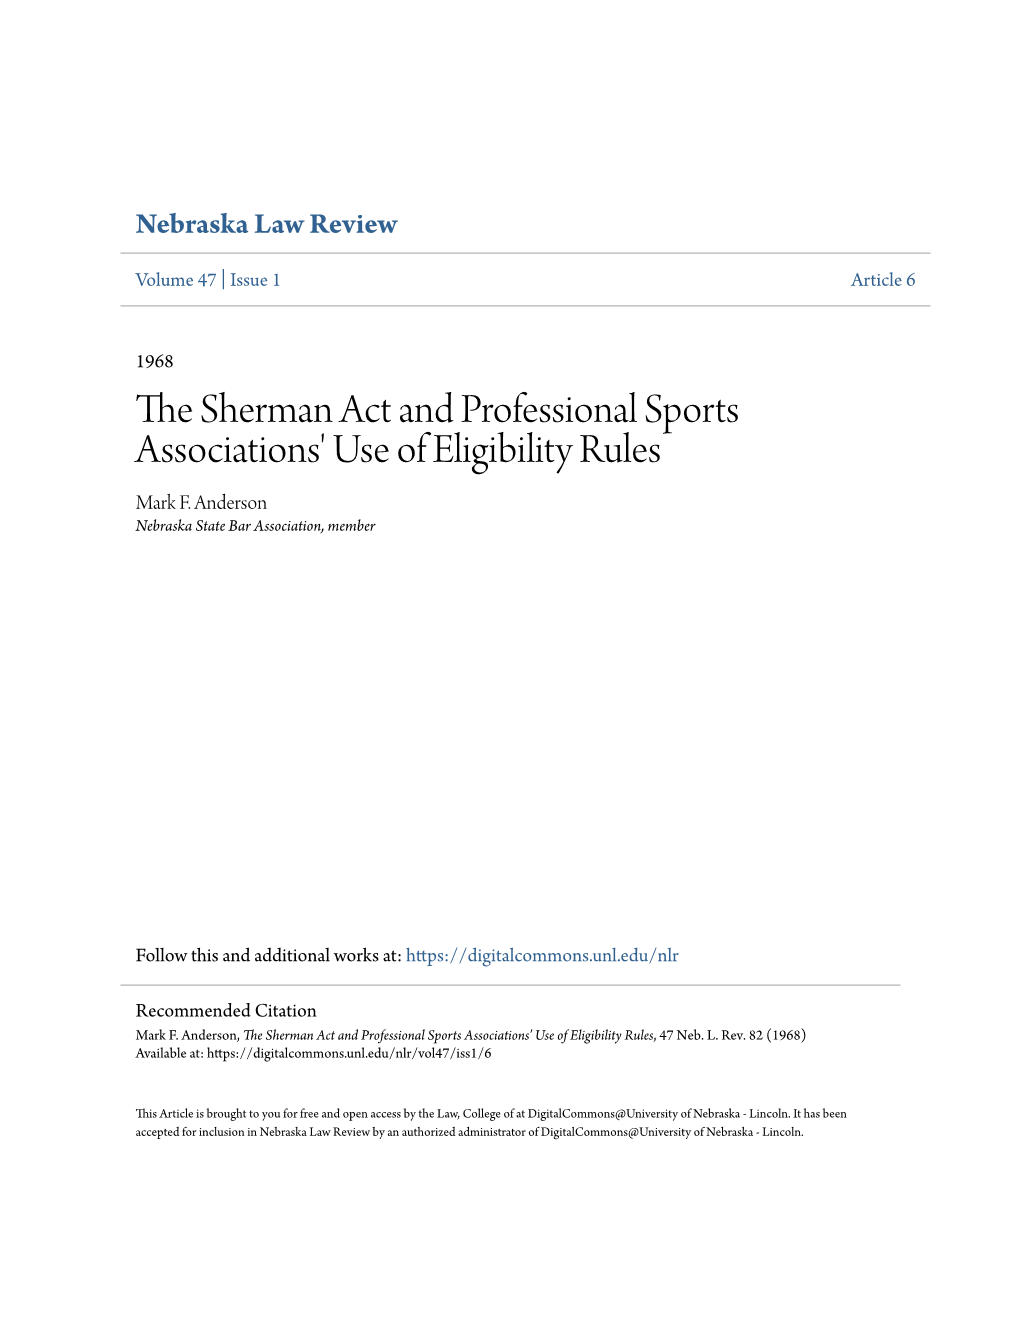 The Sherman Act and Professional Sports Associations' Use of Eligibility Rules, 47 Neb